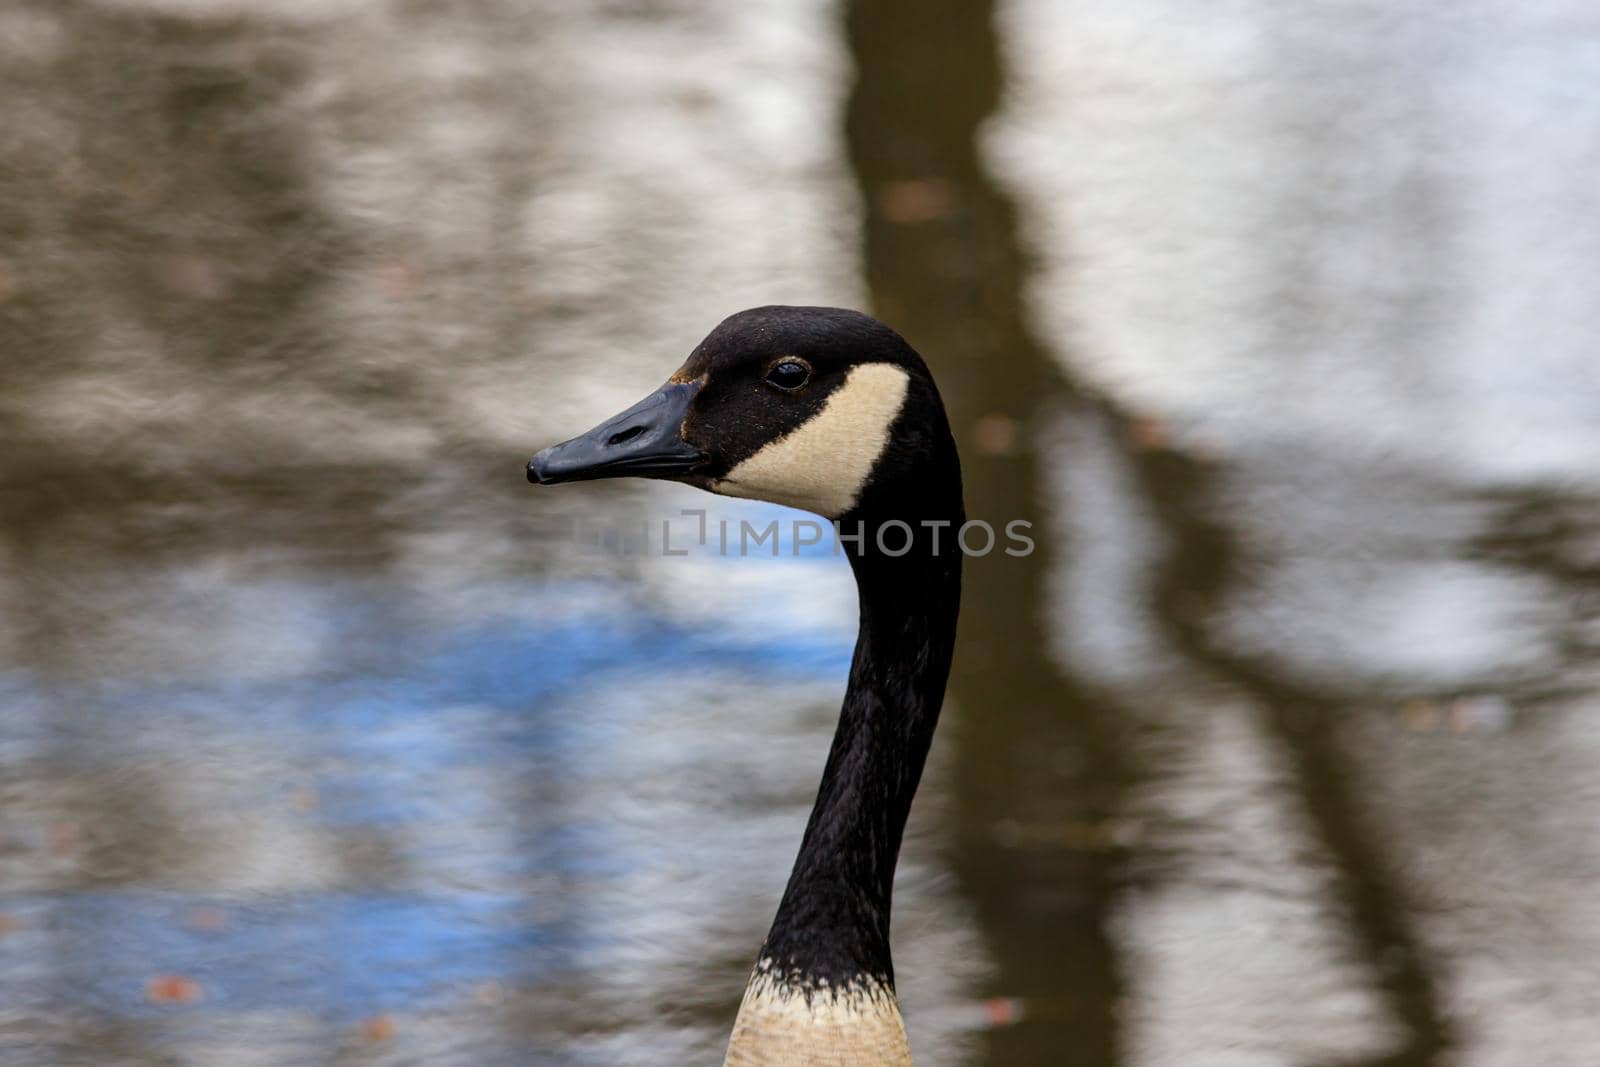 The head and neck of a Canada goose (Branta canadensis) is seen in profile against a water background.